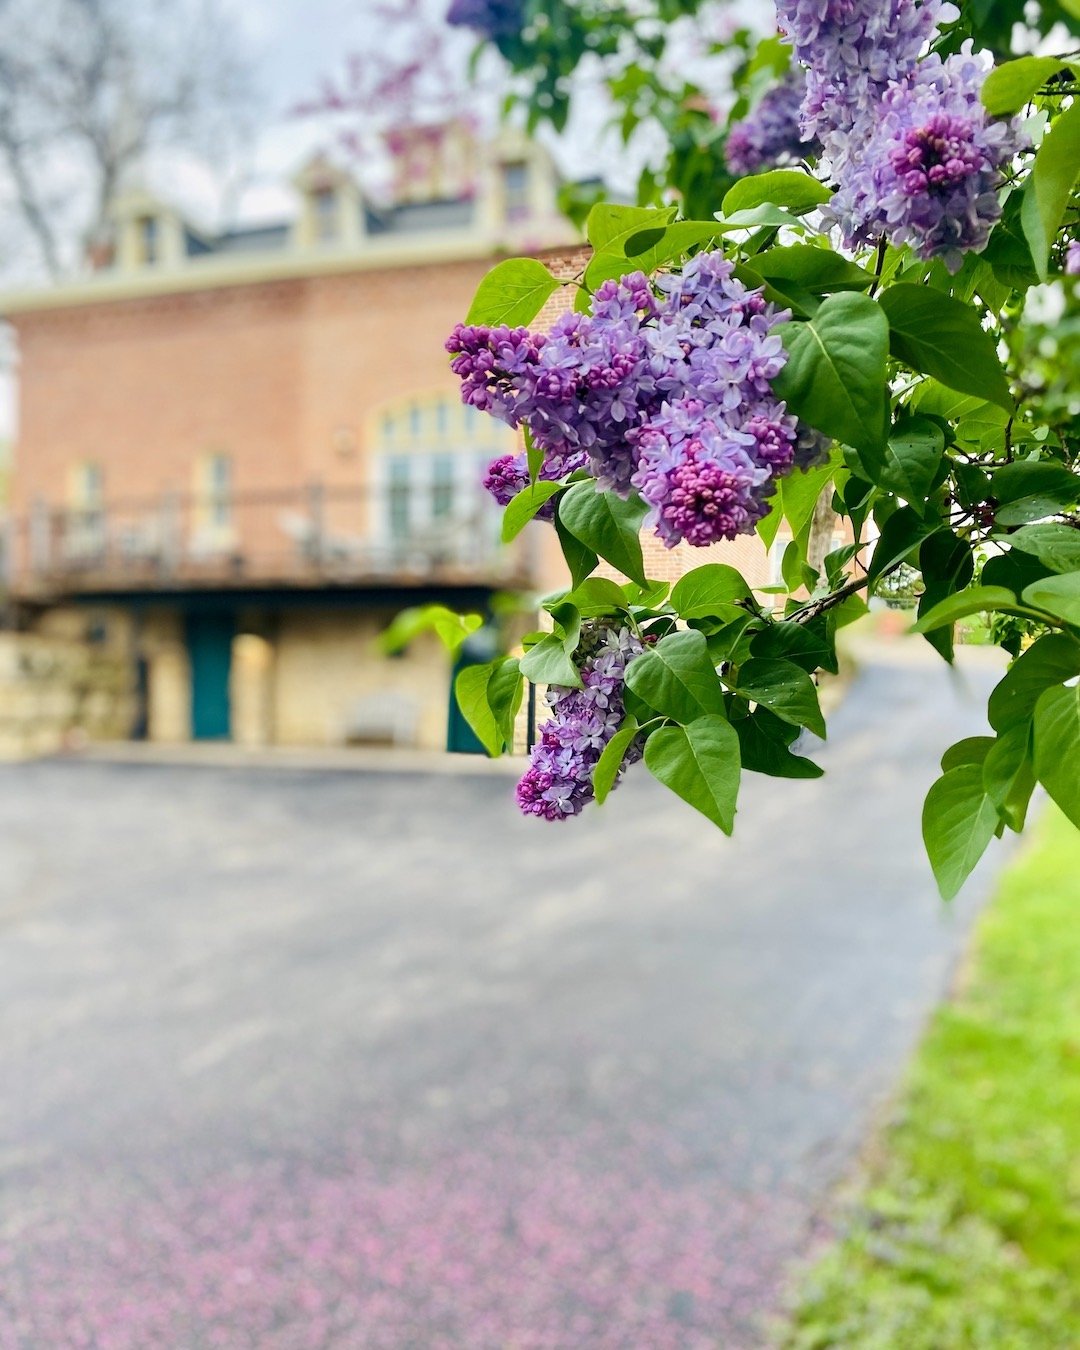 SPRING!

Come see for yourself. Take advantage of our Spring Special rates on stays through May 30. Link in bio.

.
.
.

 #feltmanor #airbnb #airbnbsuperhost #getaway #gettogalena #galenaillinois #GalenaCountry